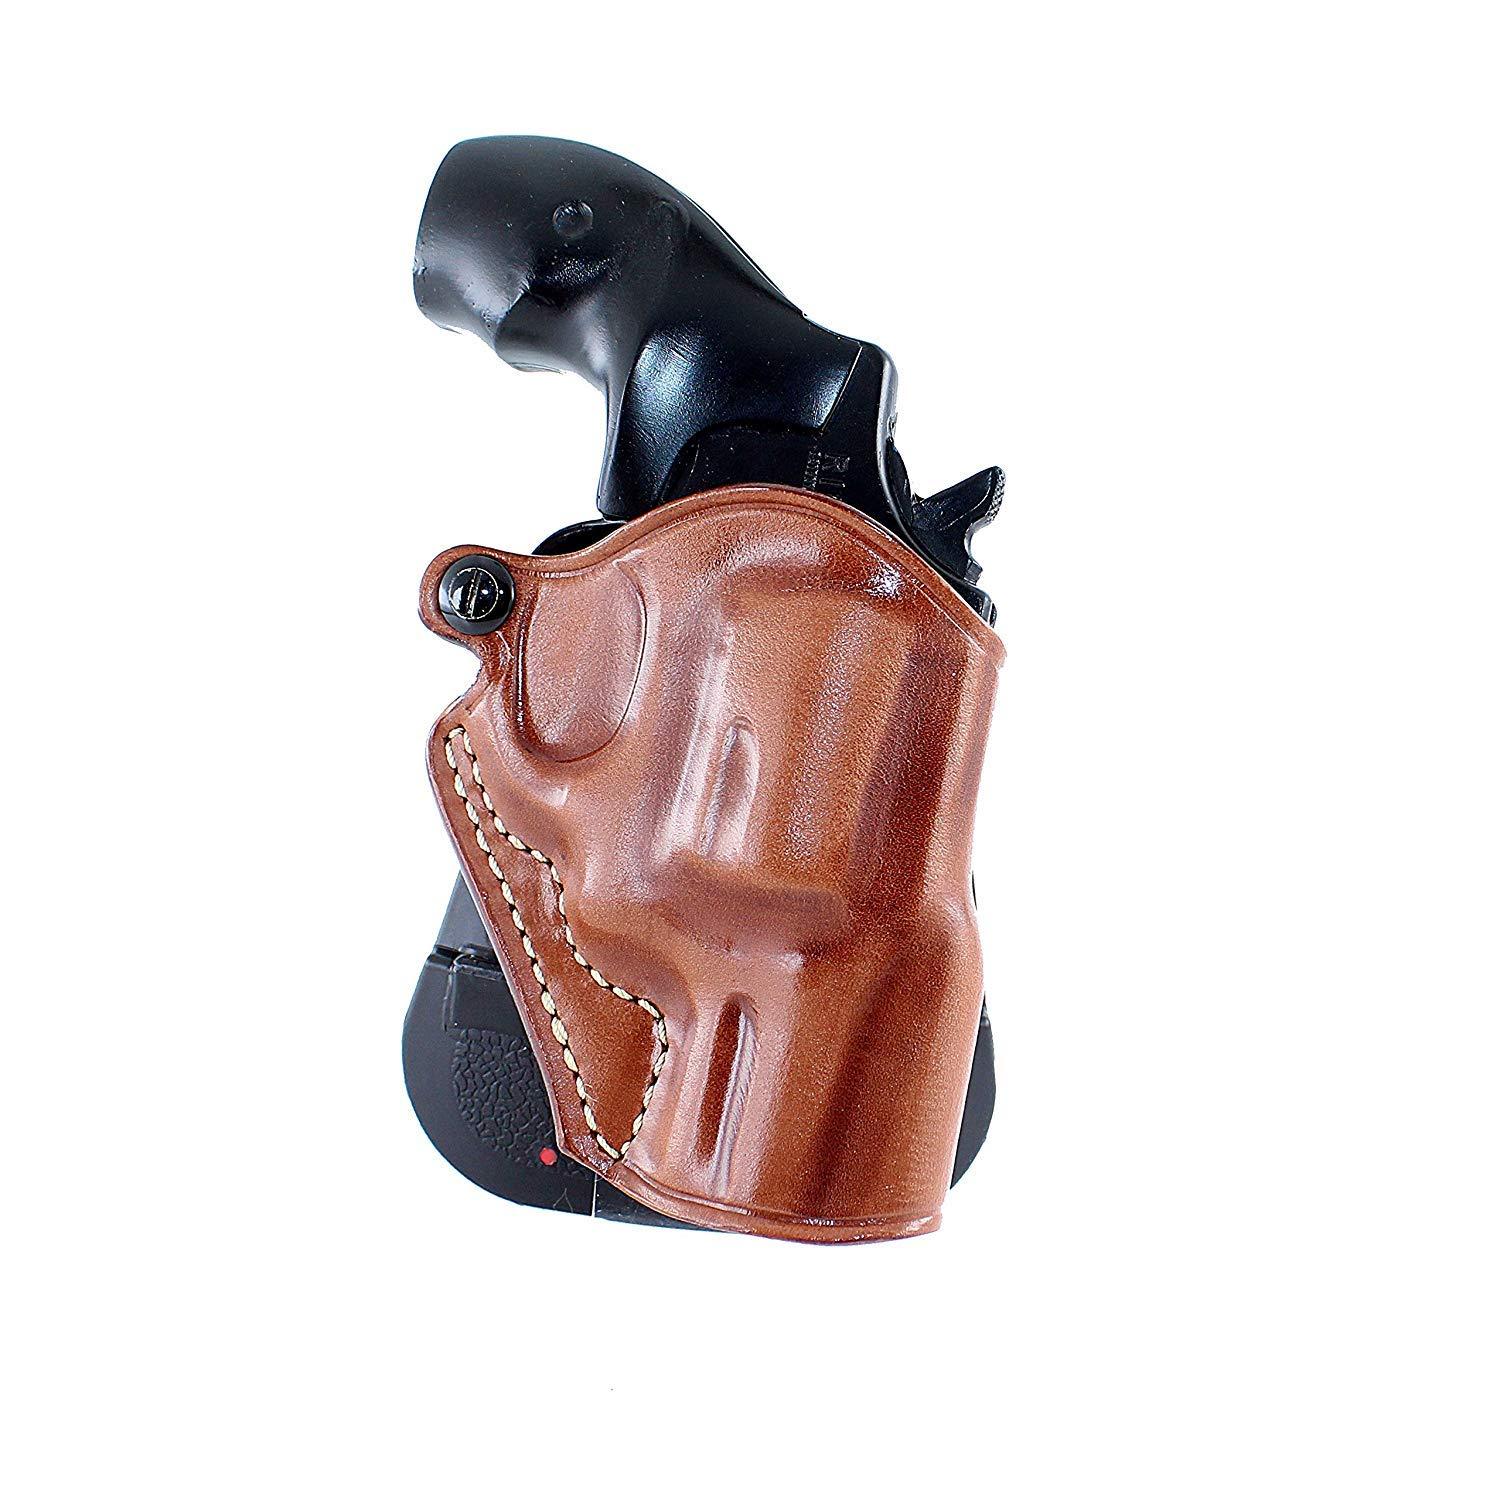 Leather OWB Paddle Holster Fits S&W Chiefs Special 38 Spl. Revolver 2"BBL #5056# - $59.99